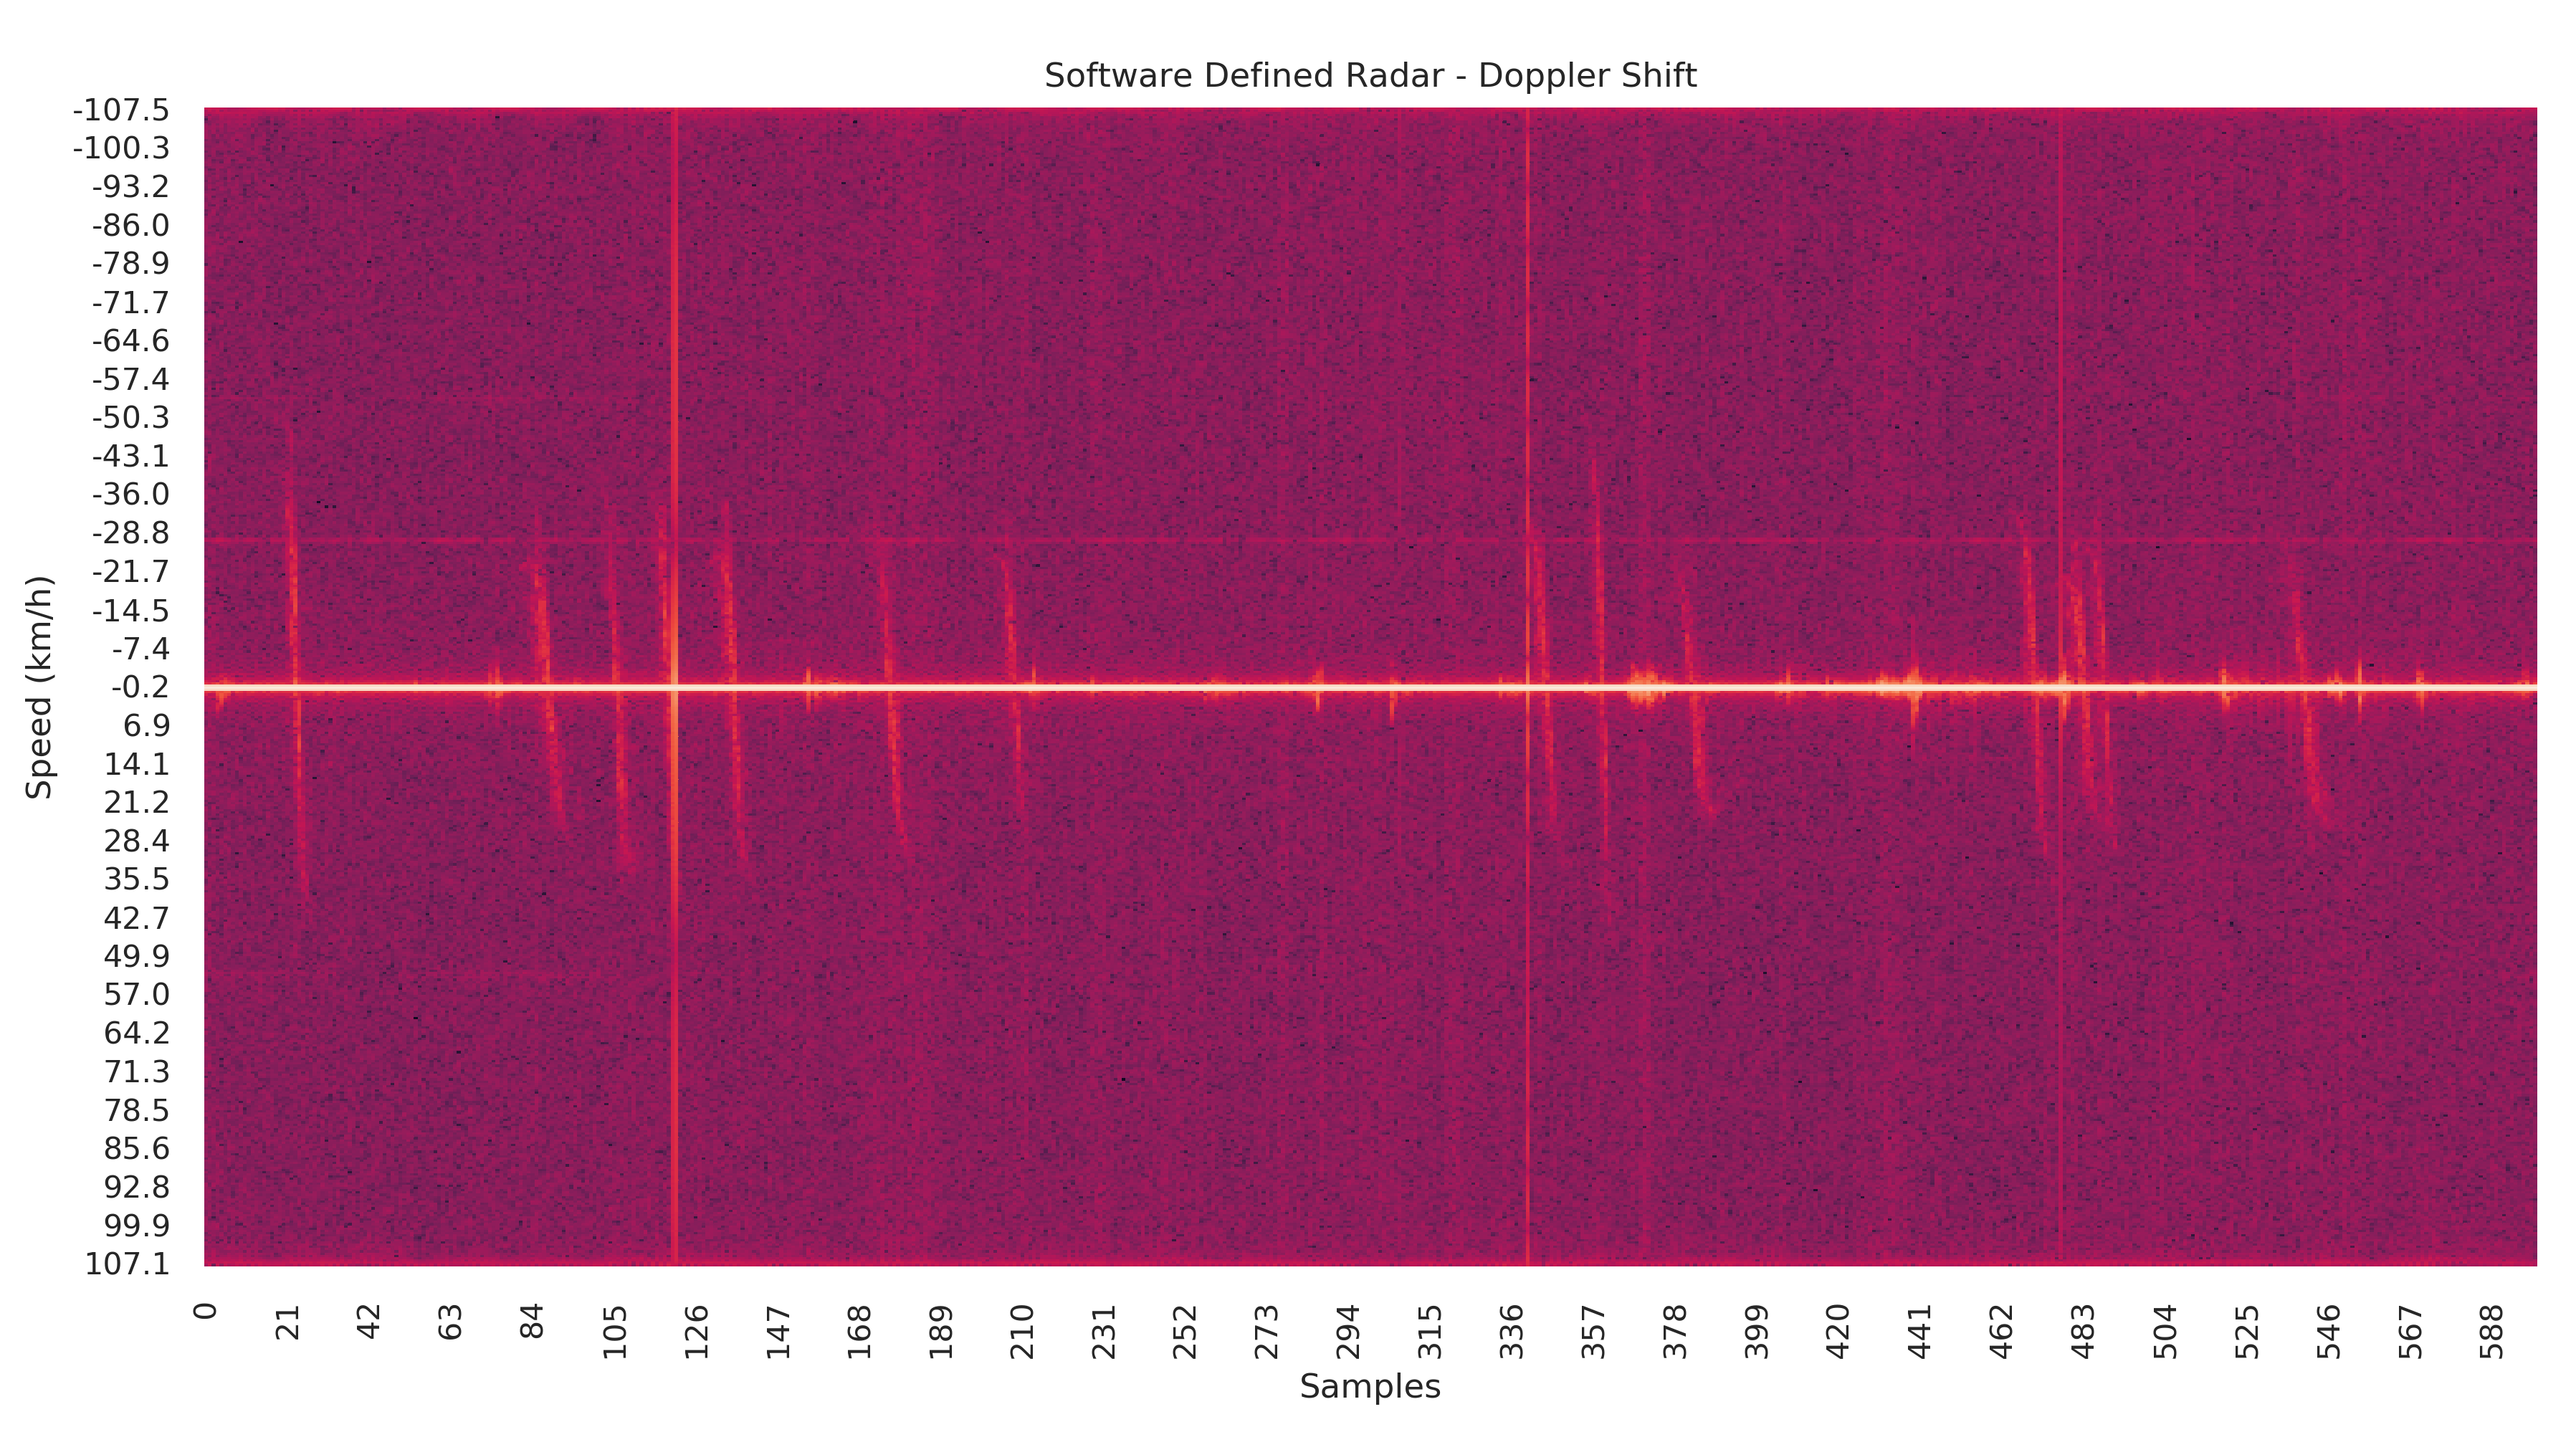 LimeSDR Vehicle Doppler Radar Results: Each long line indicates a vehicle, and shorter lines indicate pedestrians.